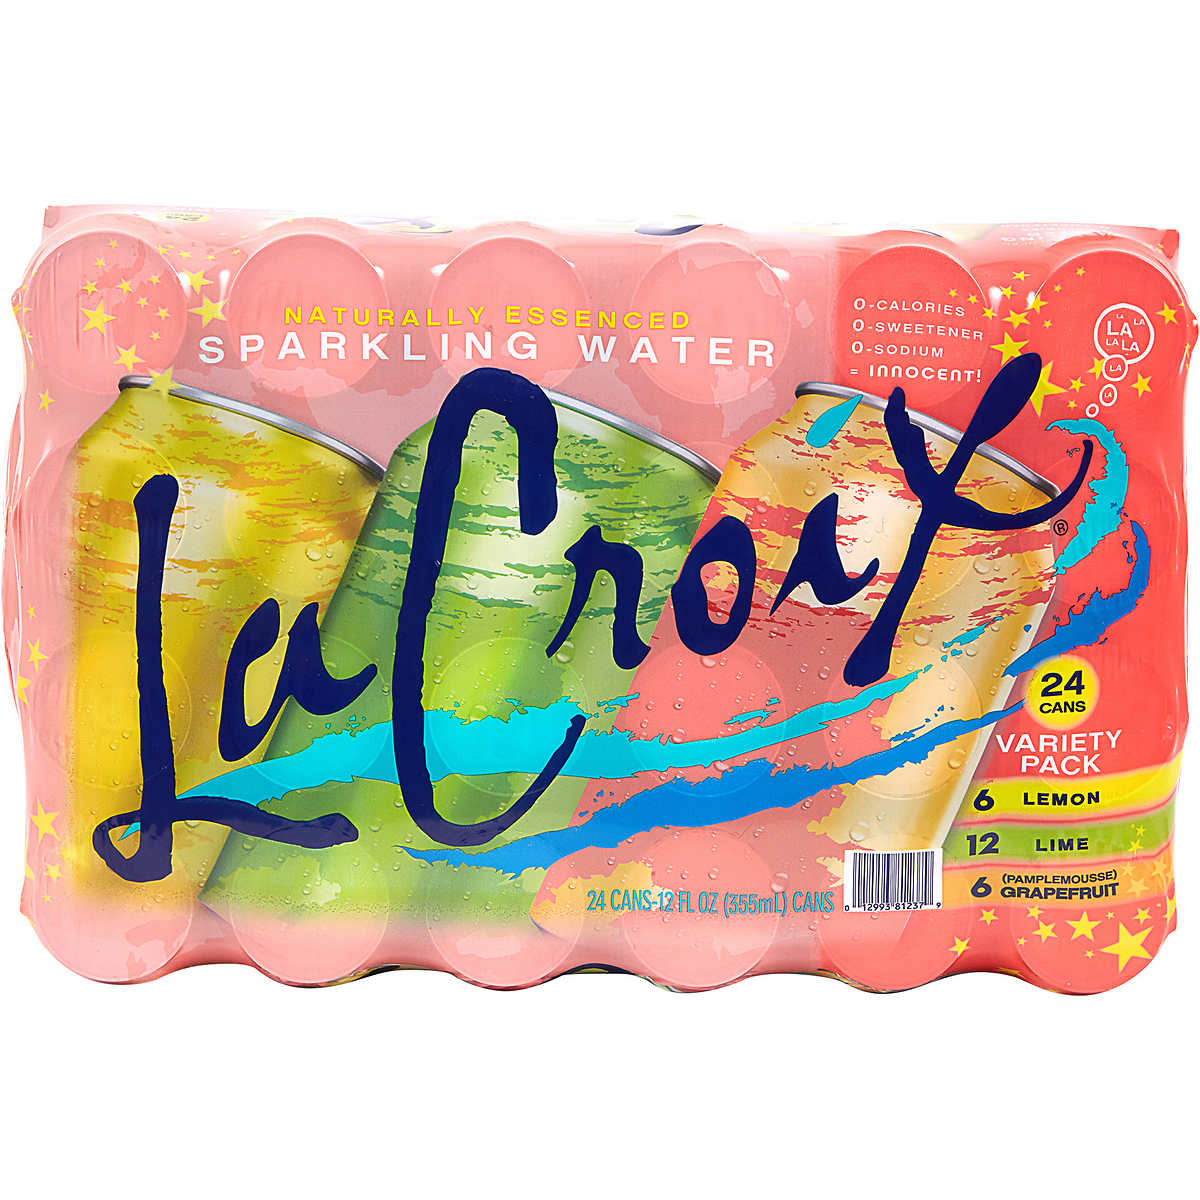 La Croix On A Budget Costco Releases Affordable Flavored Sparkling Water